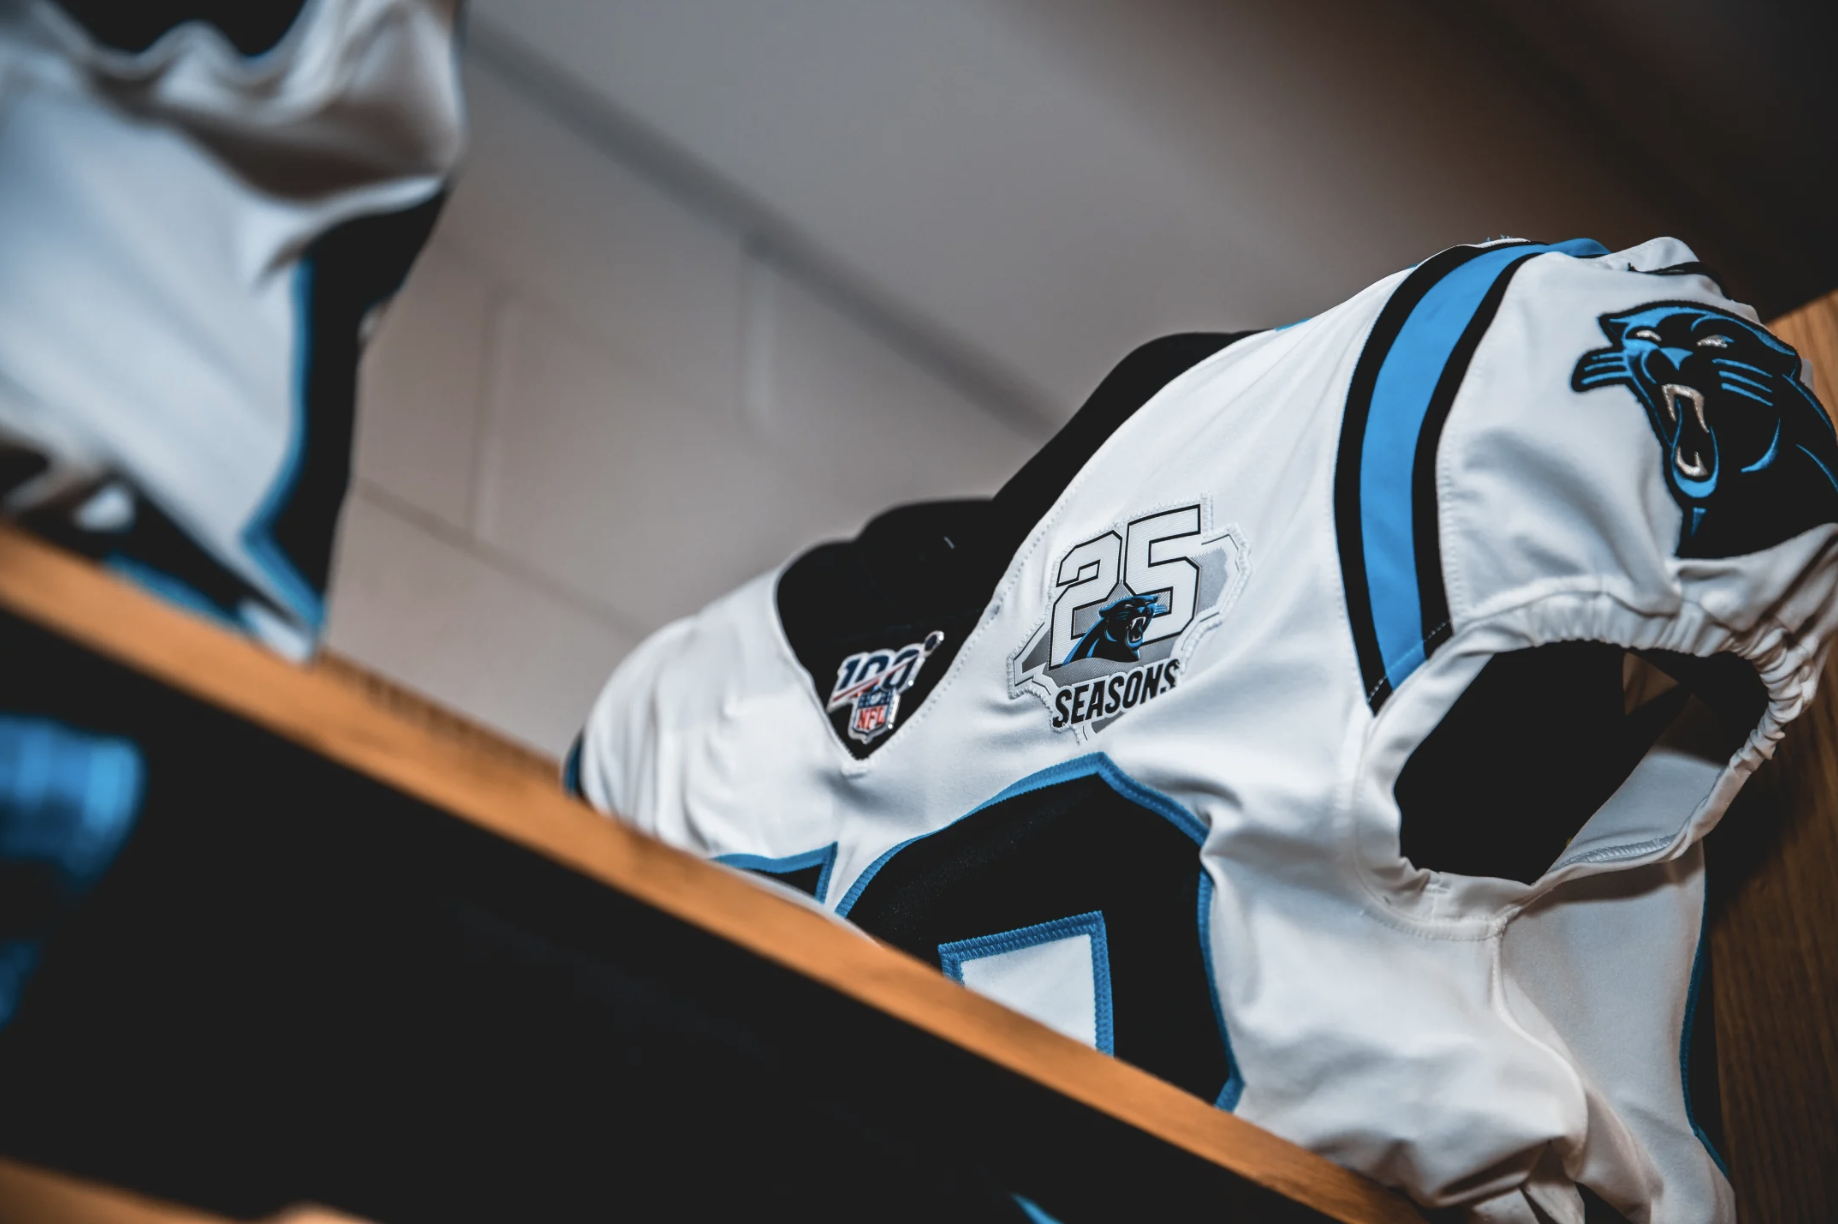 panthers jersey new